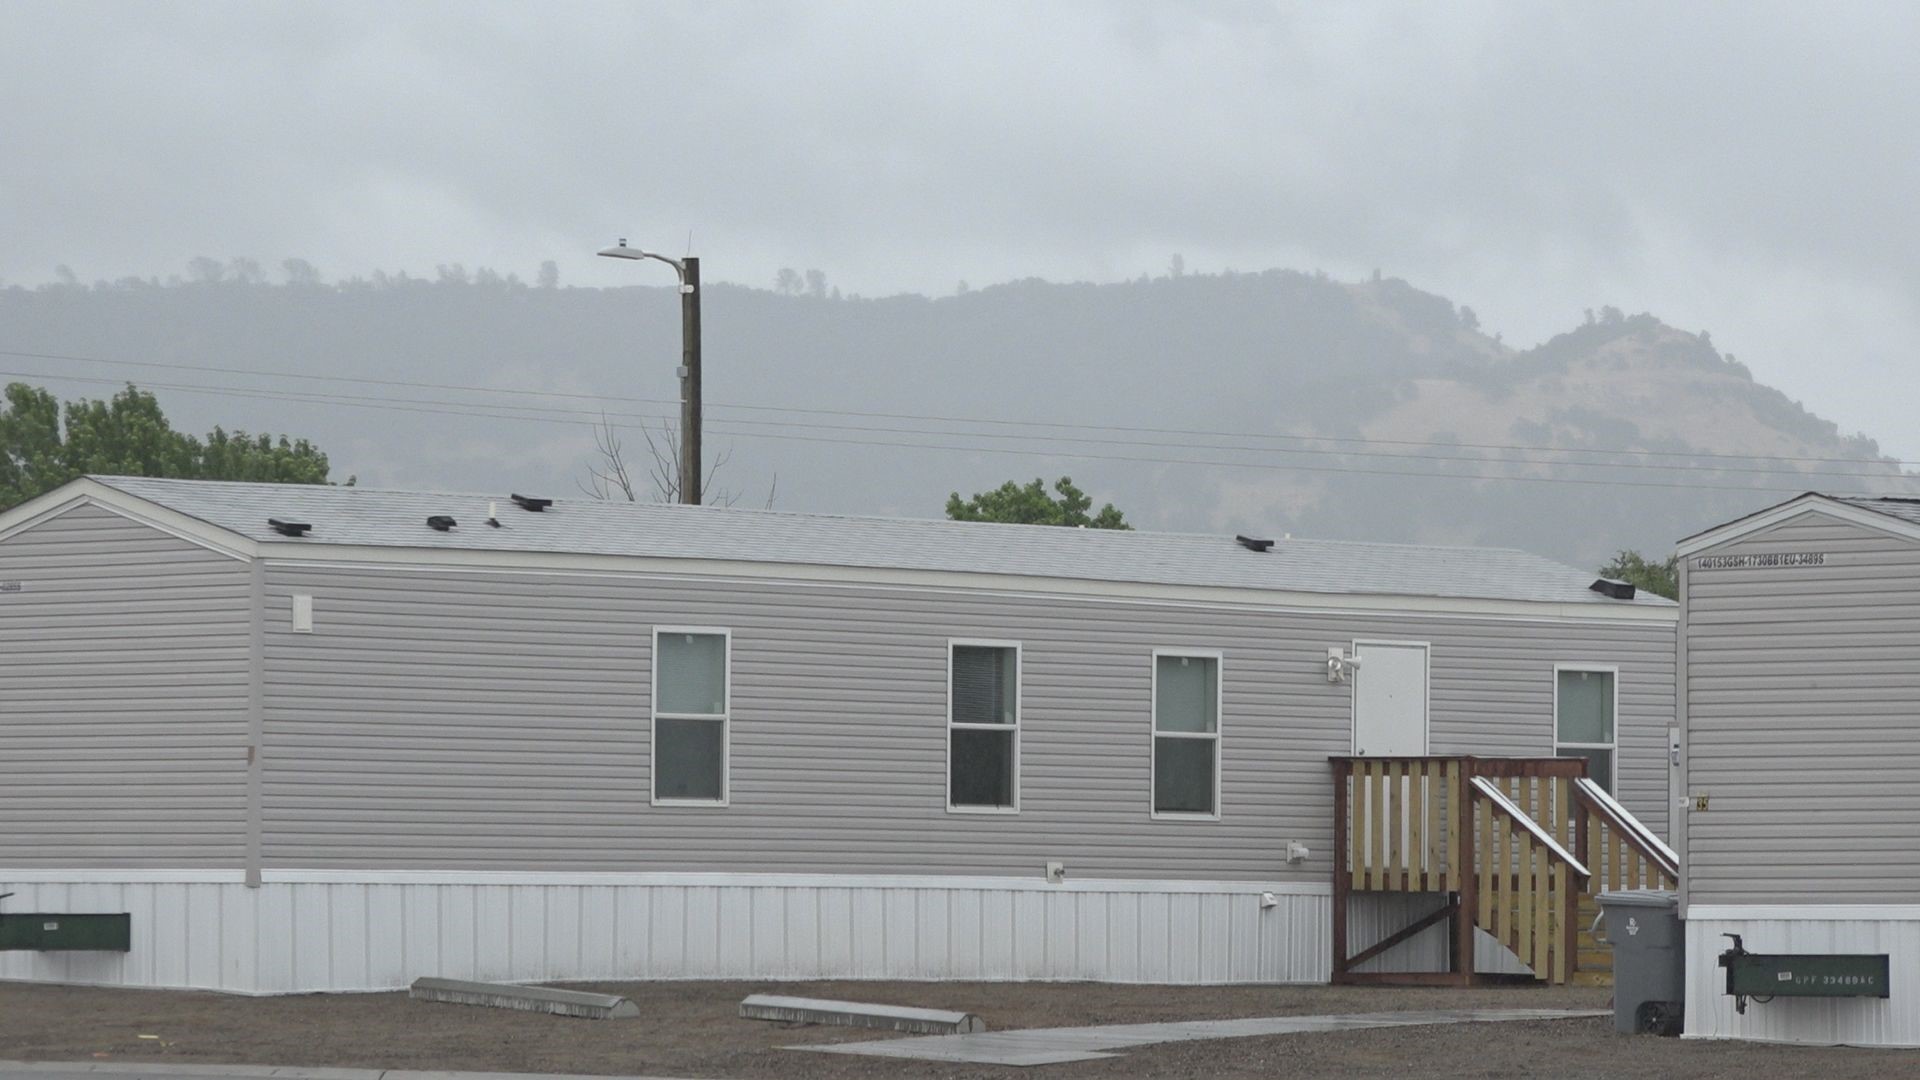 The site in Oroville, California will house 40 families in temporary housing units through July 2020.